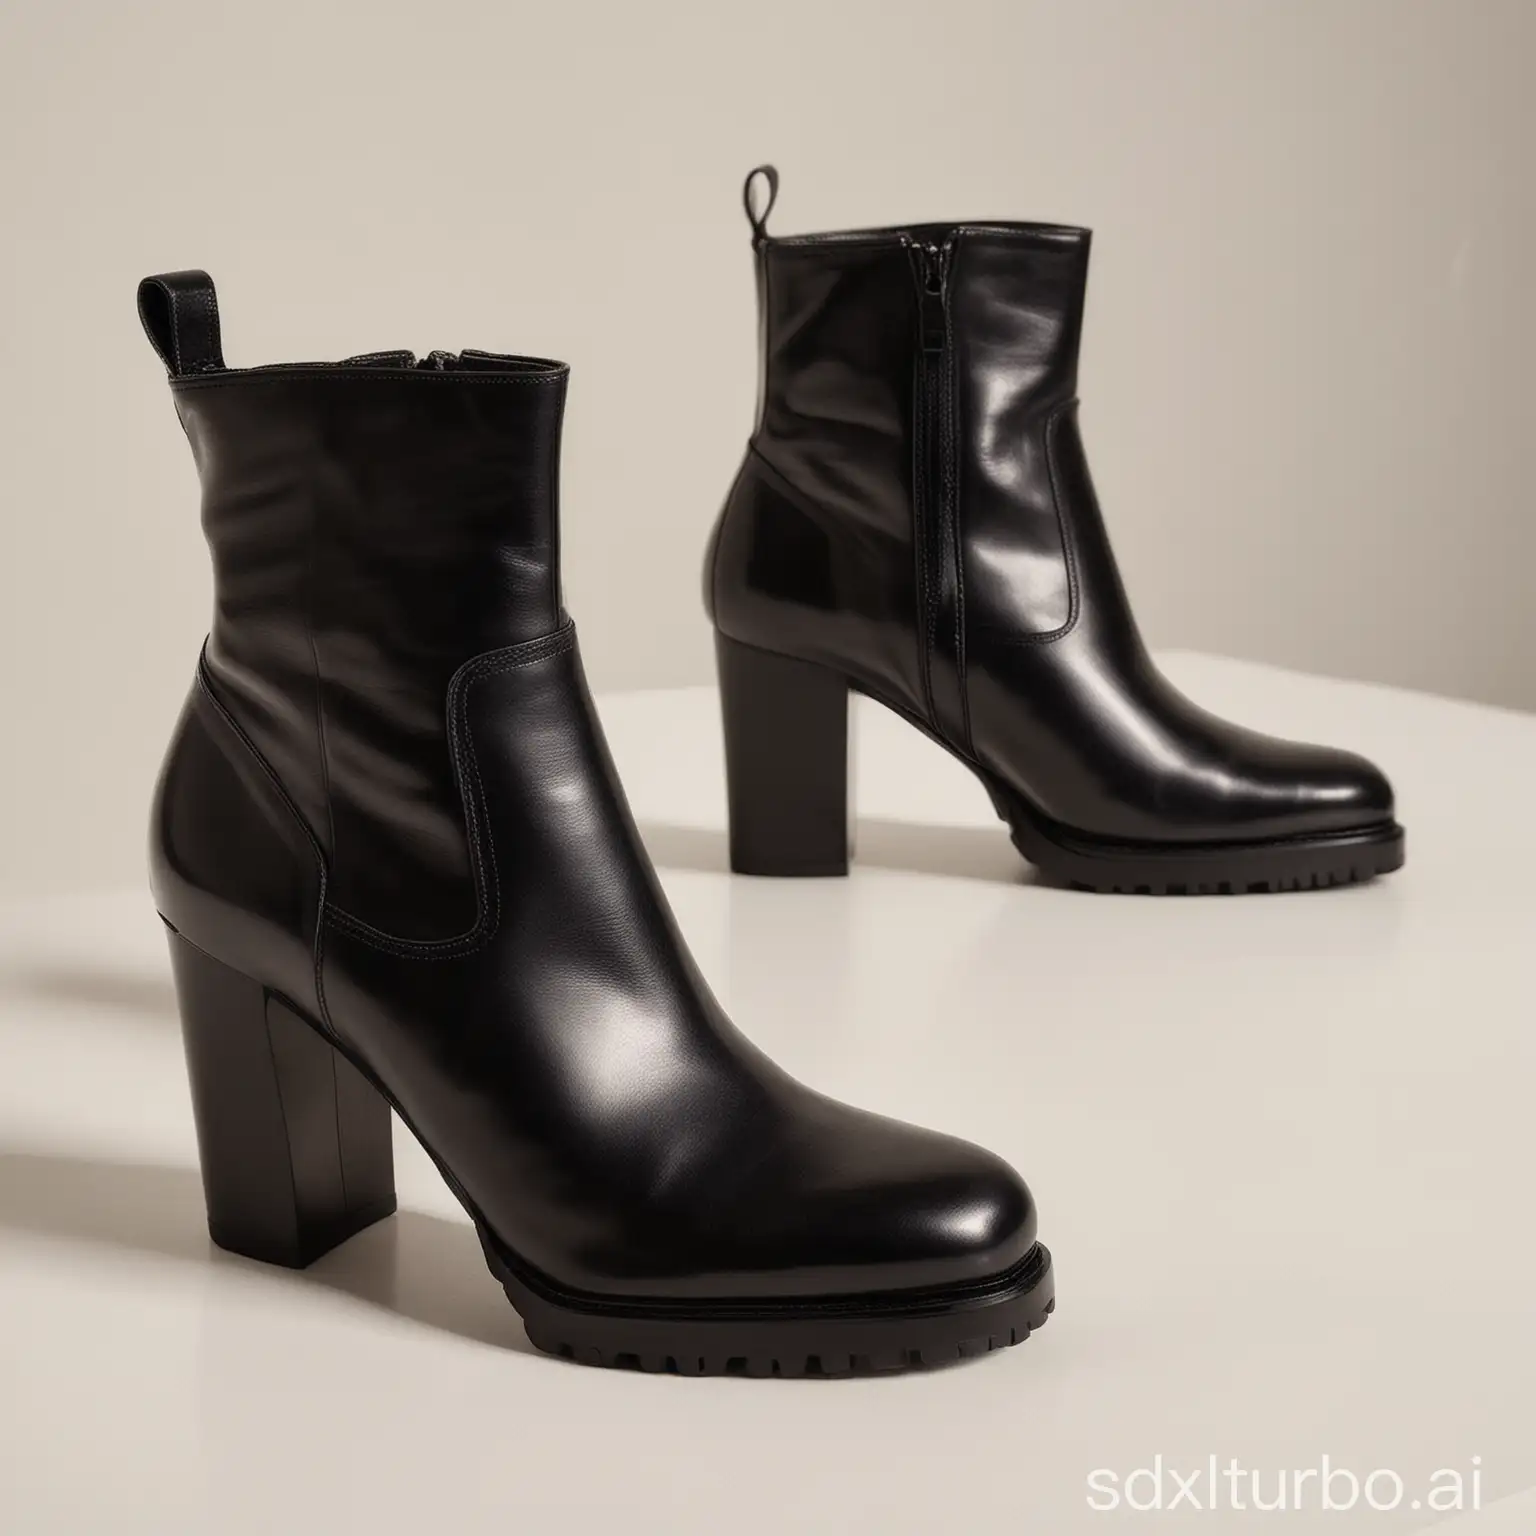 Stylish-Black-Leather-Ankle-Boots-with-Chunky-Heel-on-White-Background